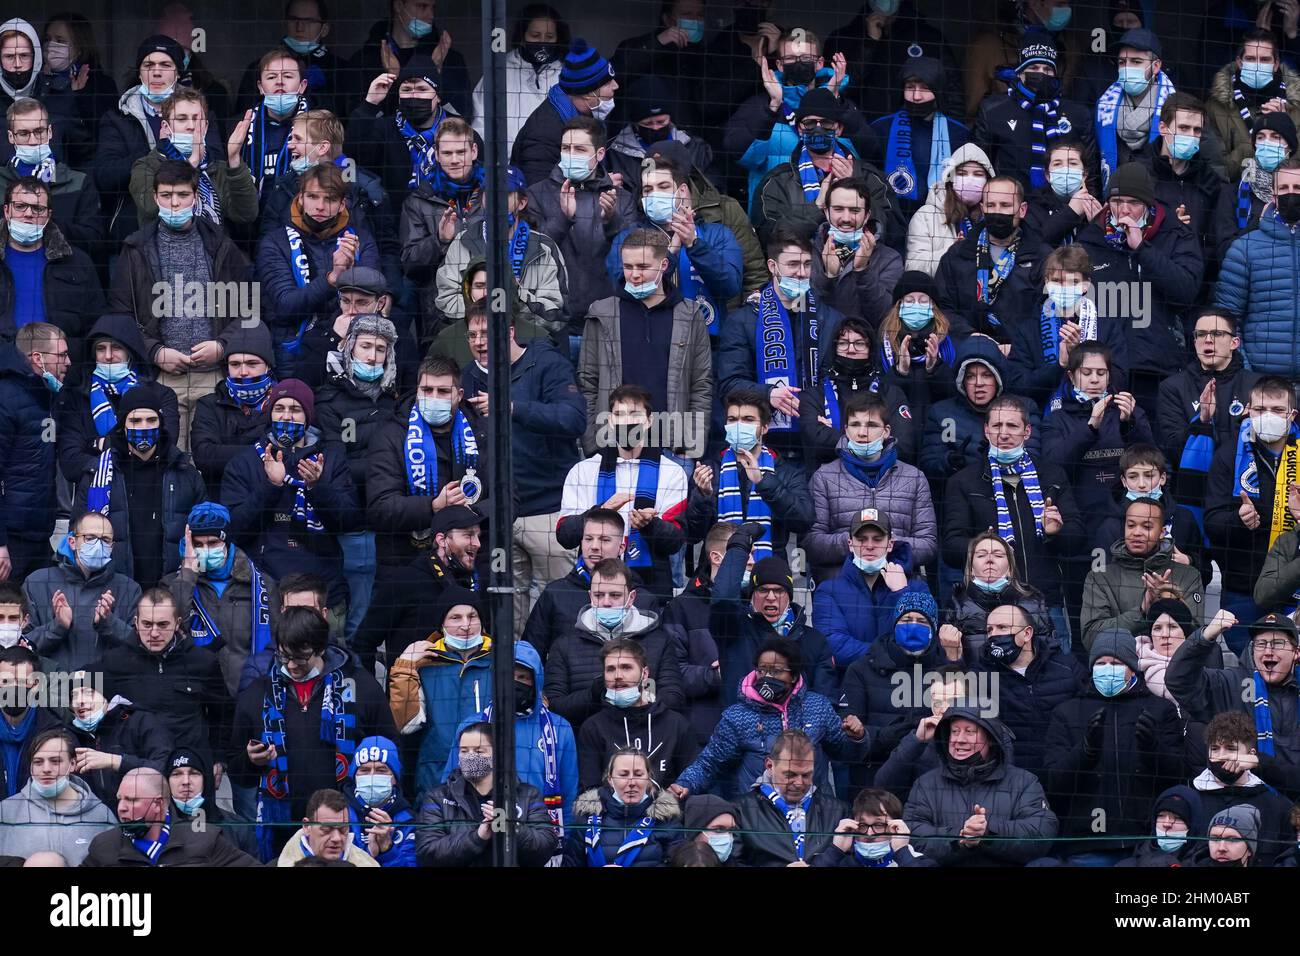 BRUGES, BELGIUM - FEBRUARY 6: Fans of Club Brugge during the